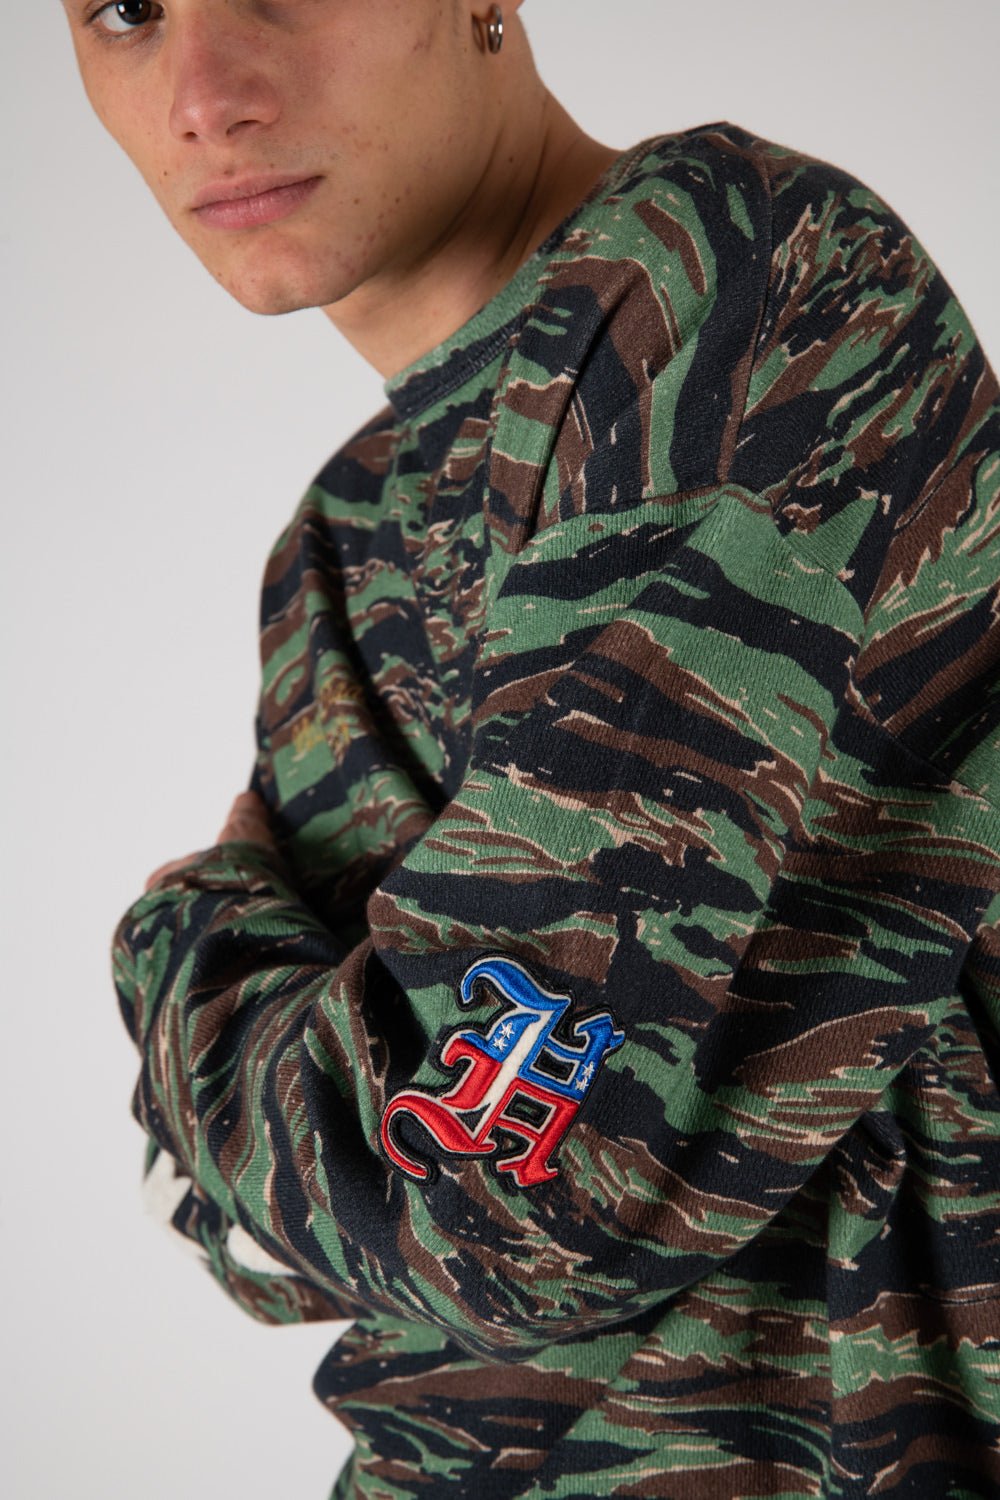 LUCKY KID - CAMO Regular fit long sleeve camo t-shirt. Patches on the sleeves. Composition: 100% Cotton HTC LOS ANGELES